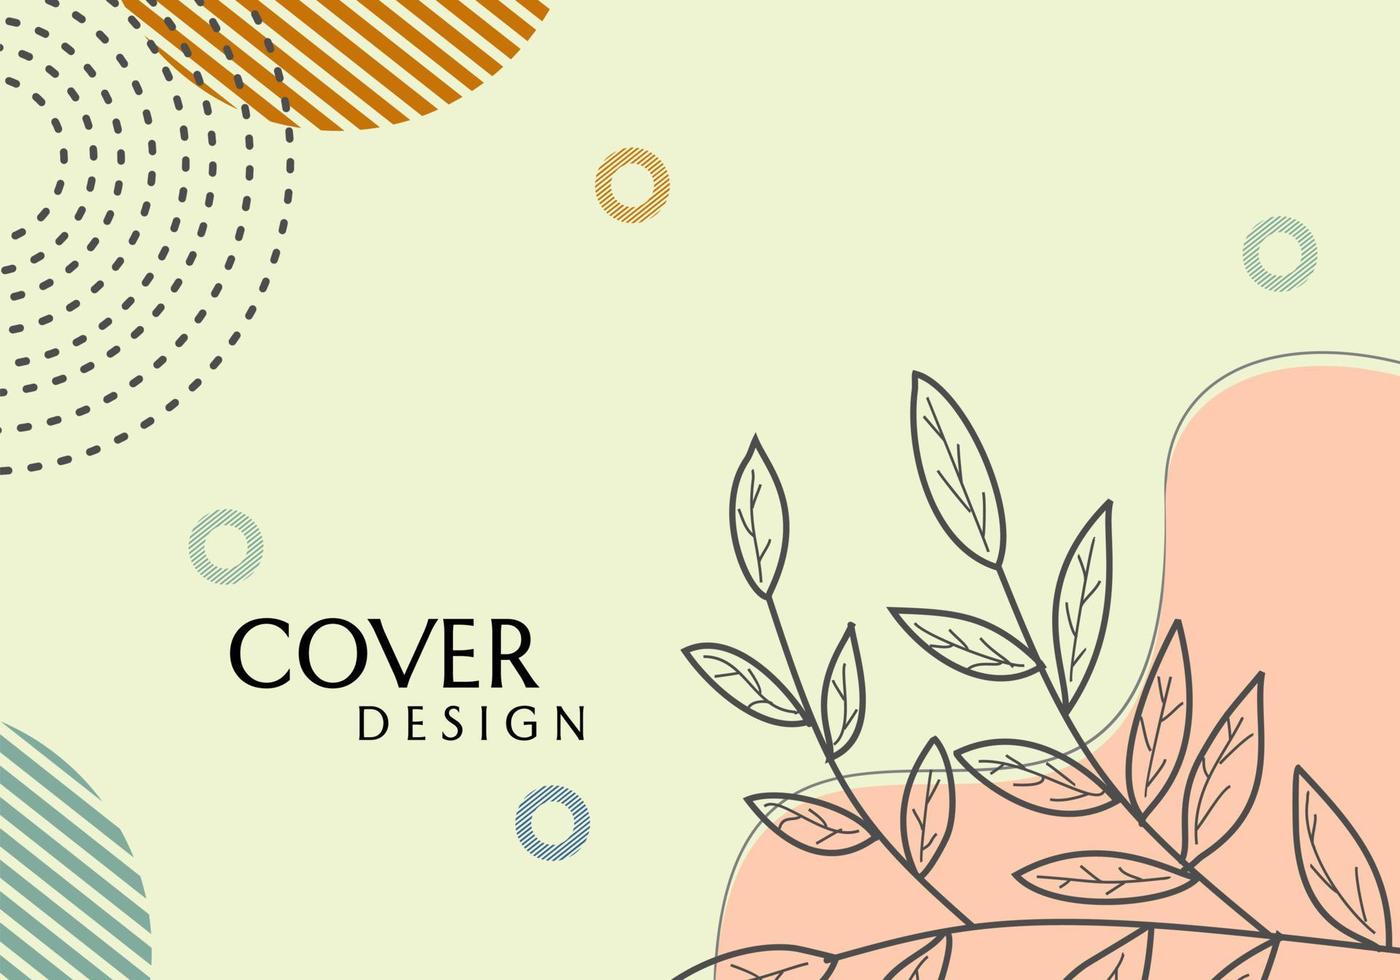 natural geometry theme banner vector design. pastel background with hand drawn leaf elements. for covers, websites, invitations